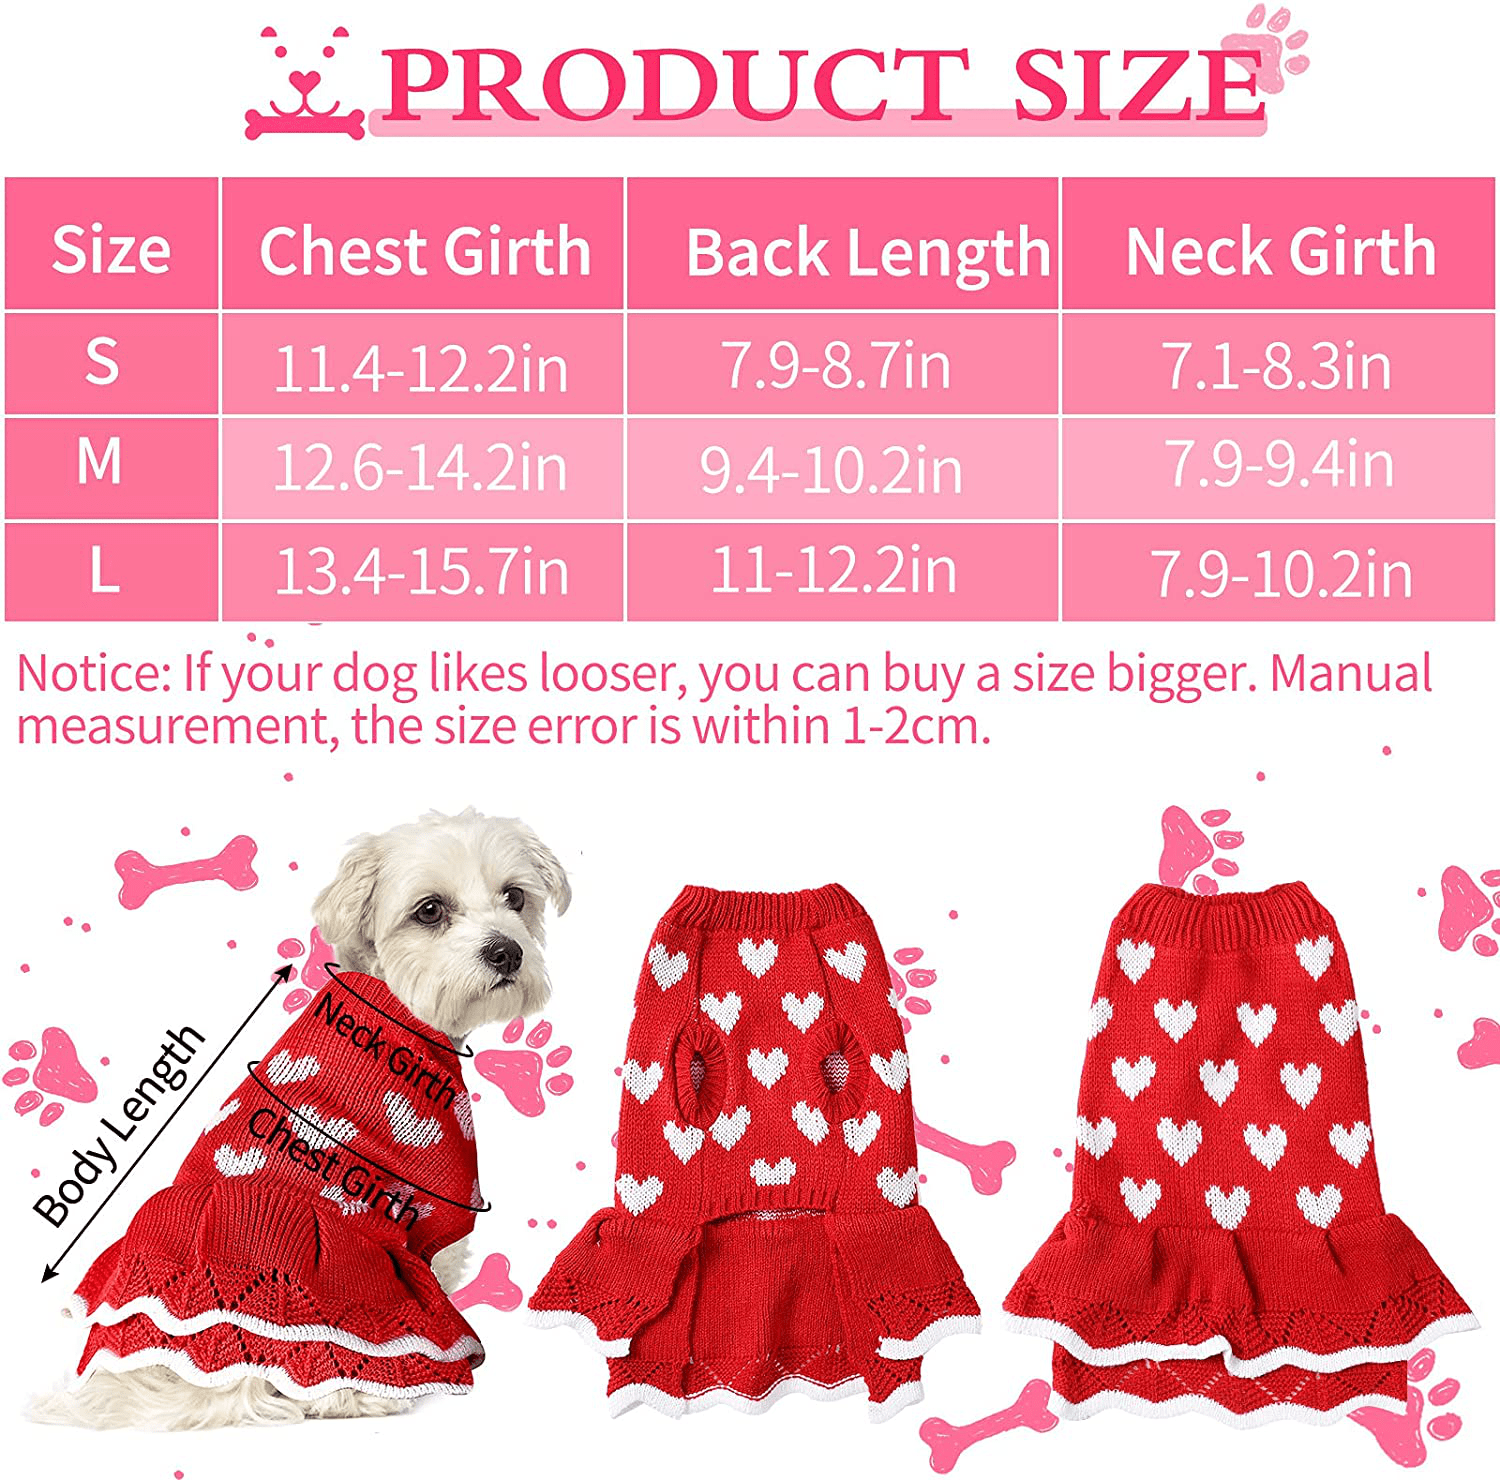 Xuniea 3 Pieces Dog Sweater Dress with Leash Hole Dog Coat Knitwear Vest Turtleneck Pullover Warm Pet Sweater Small Dog Sweater Pet Clothes Sweater for Puppy Cat Dog